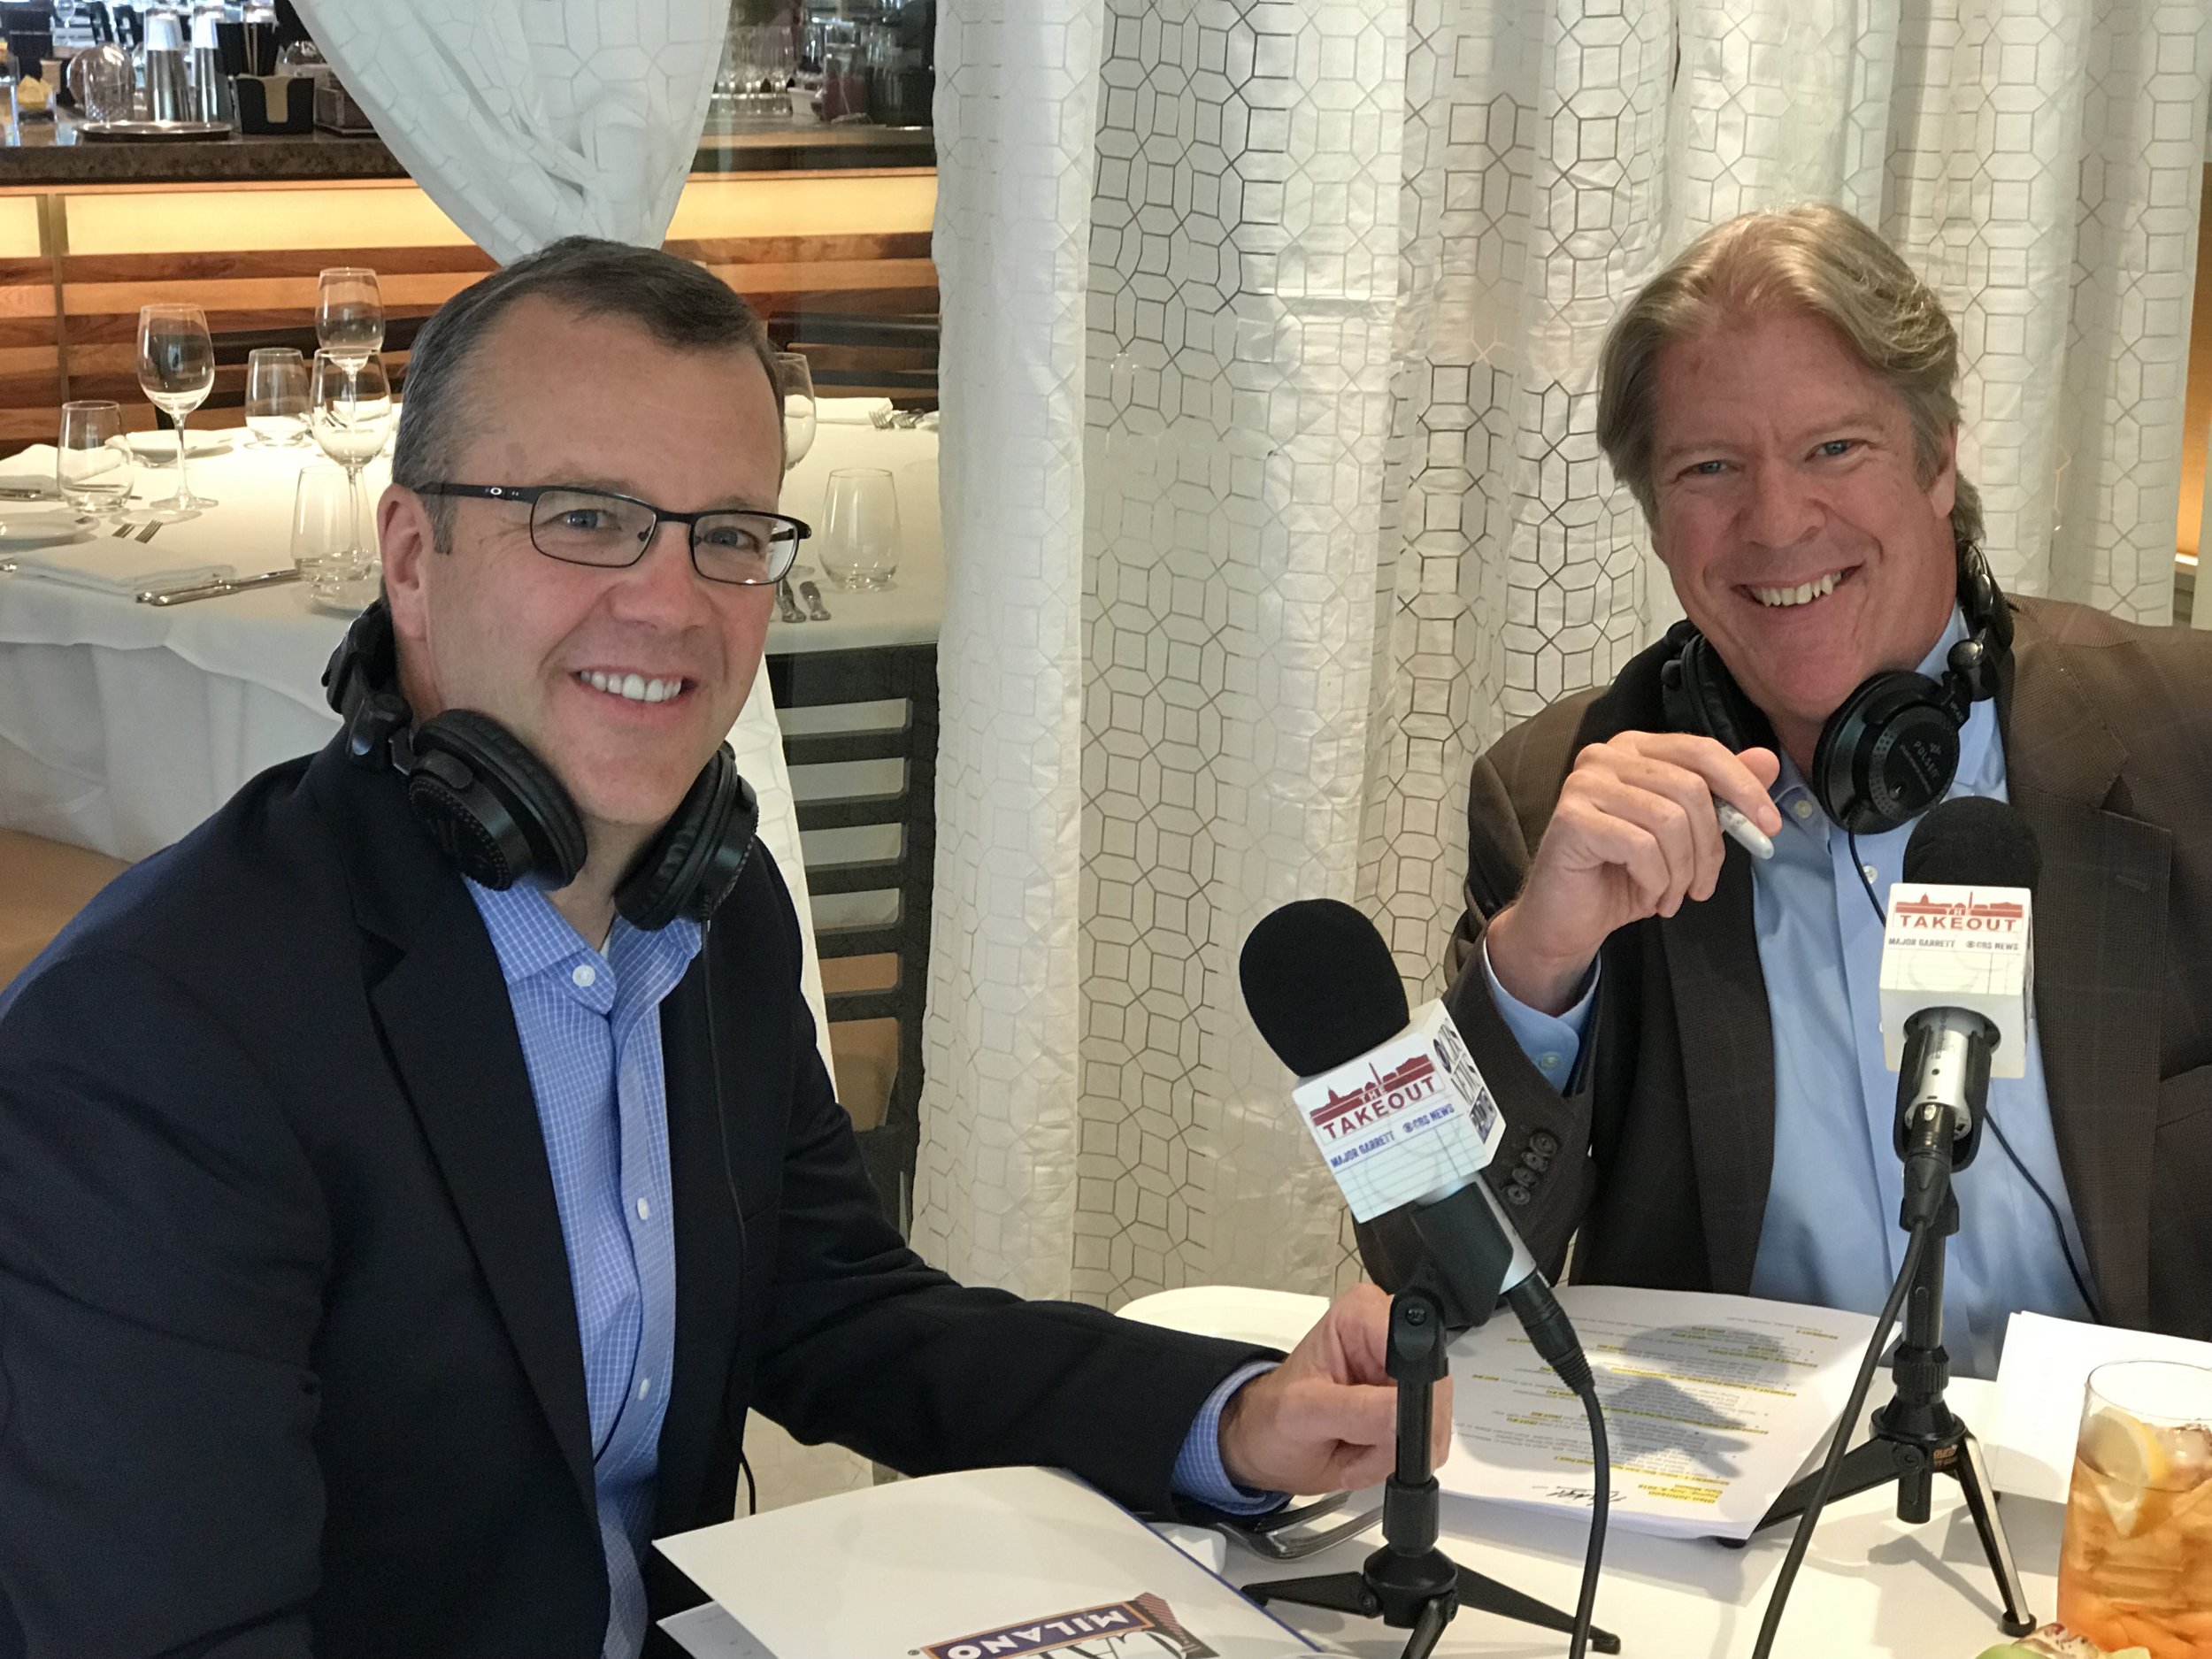  With Major Garrett at Cafe Milano in Washington to tape his CBS News podcast “The Takeout.” 